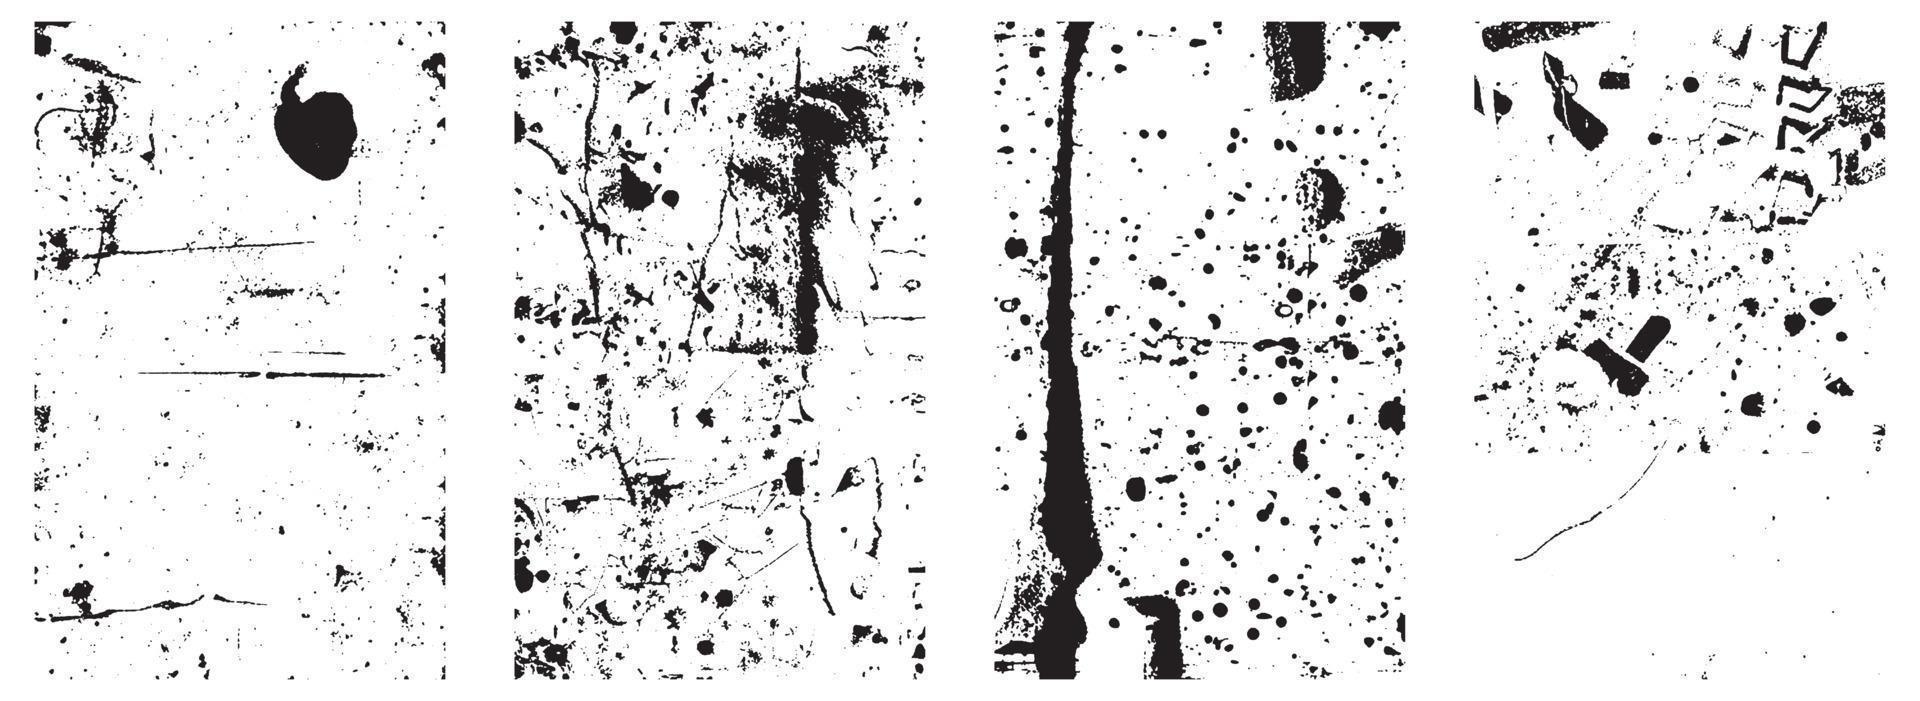 Set of Black and White Distressed Textures. Vector EPS 10.